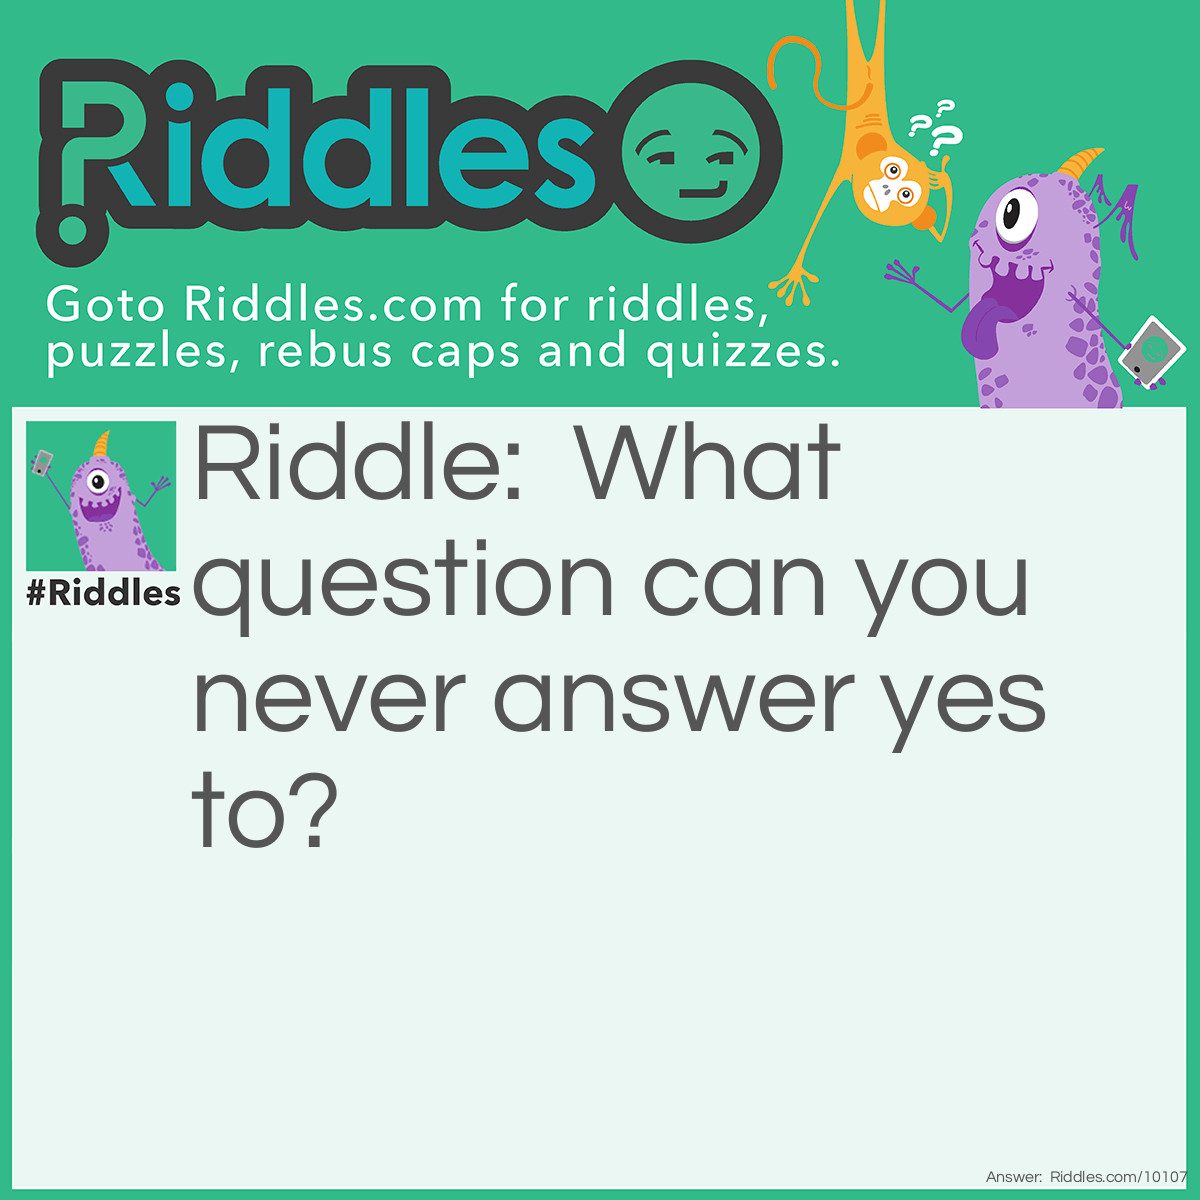 Riddle: What question can you never answer yes to? Answer: Are you asleep?